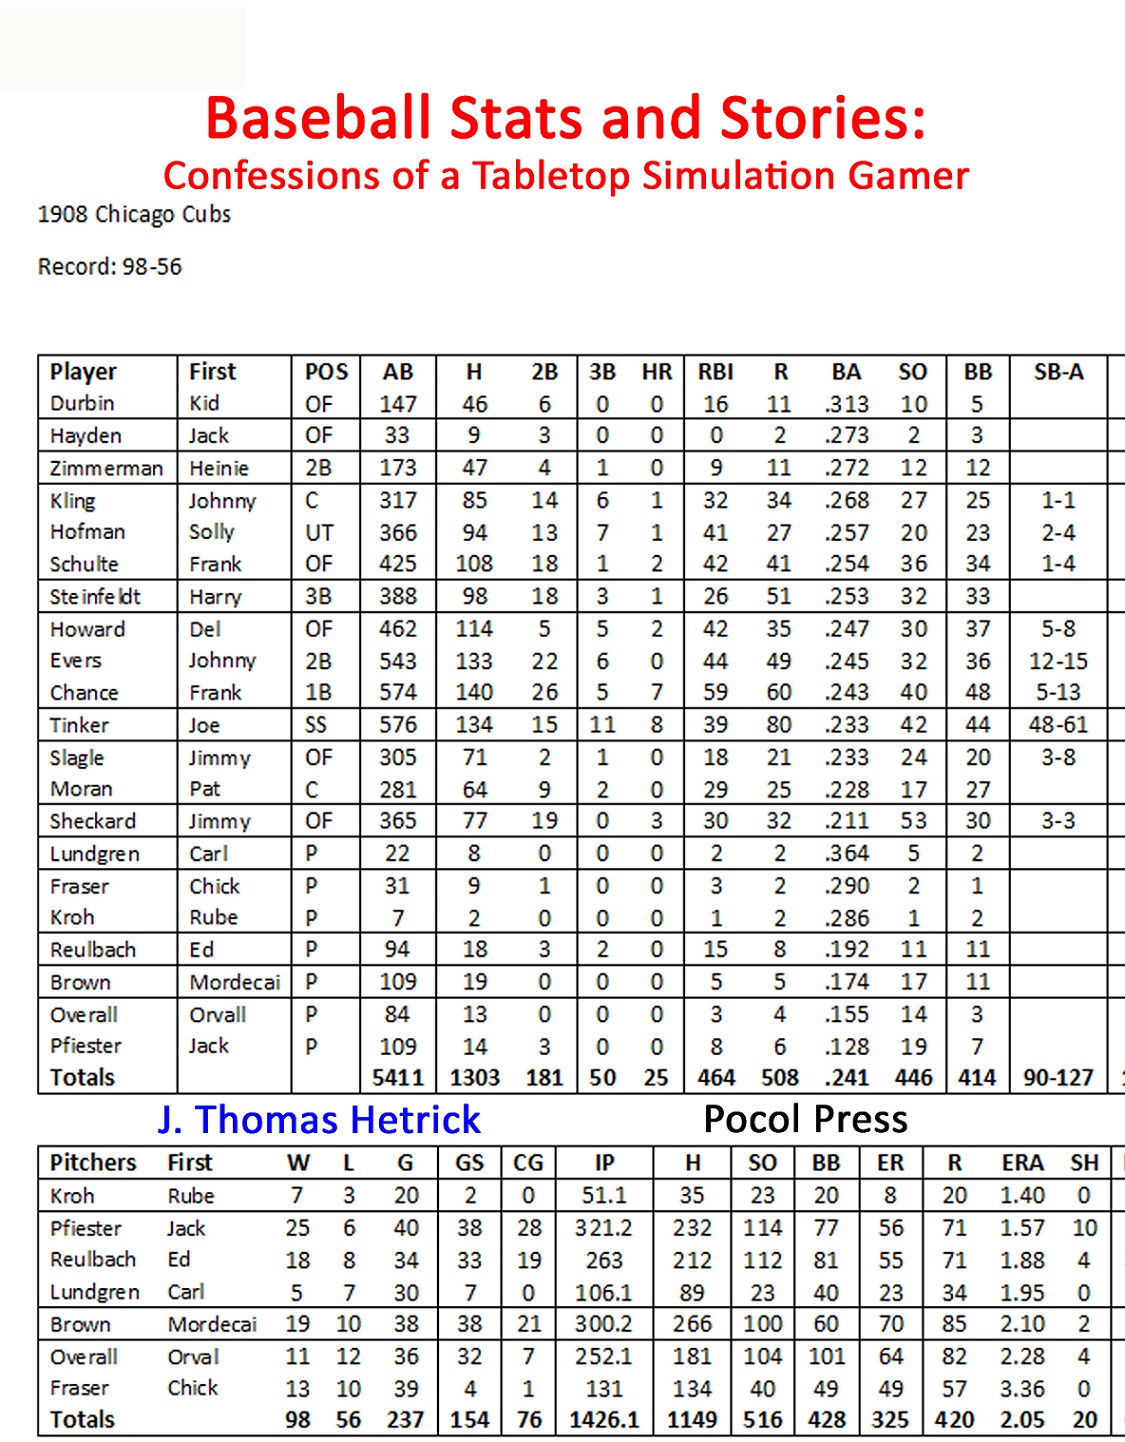 Baseball Stats and Stories: Confessions of a Tabletop Simulation Gamer